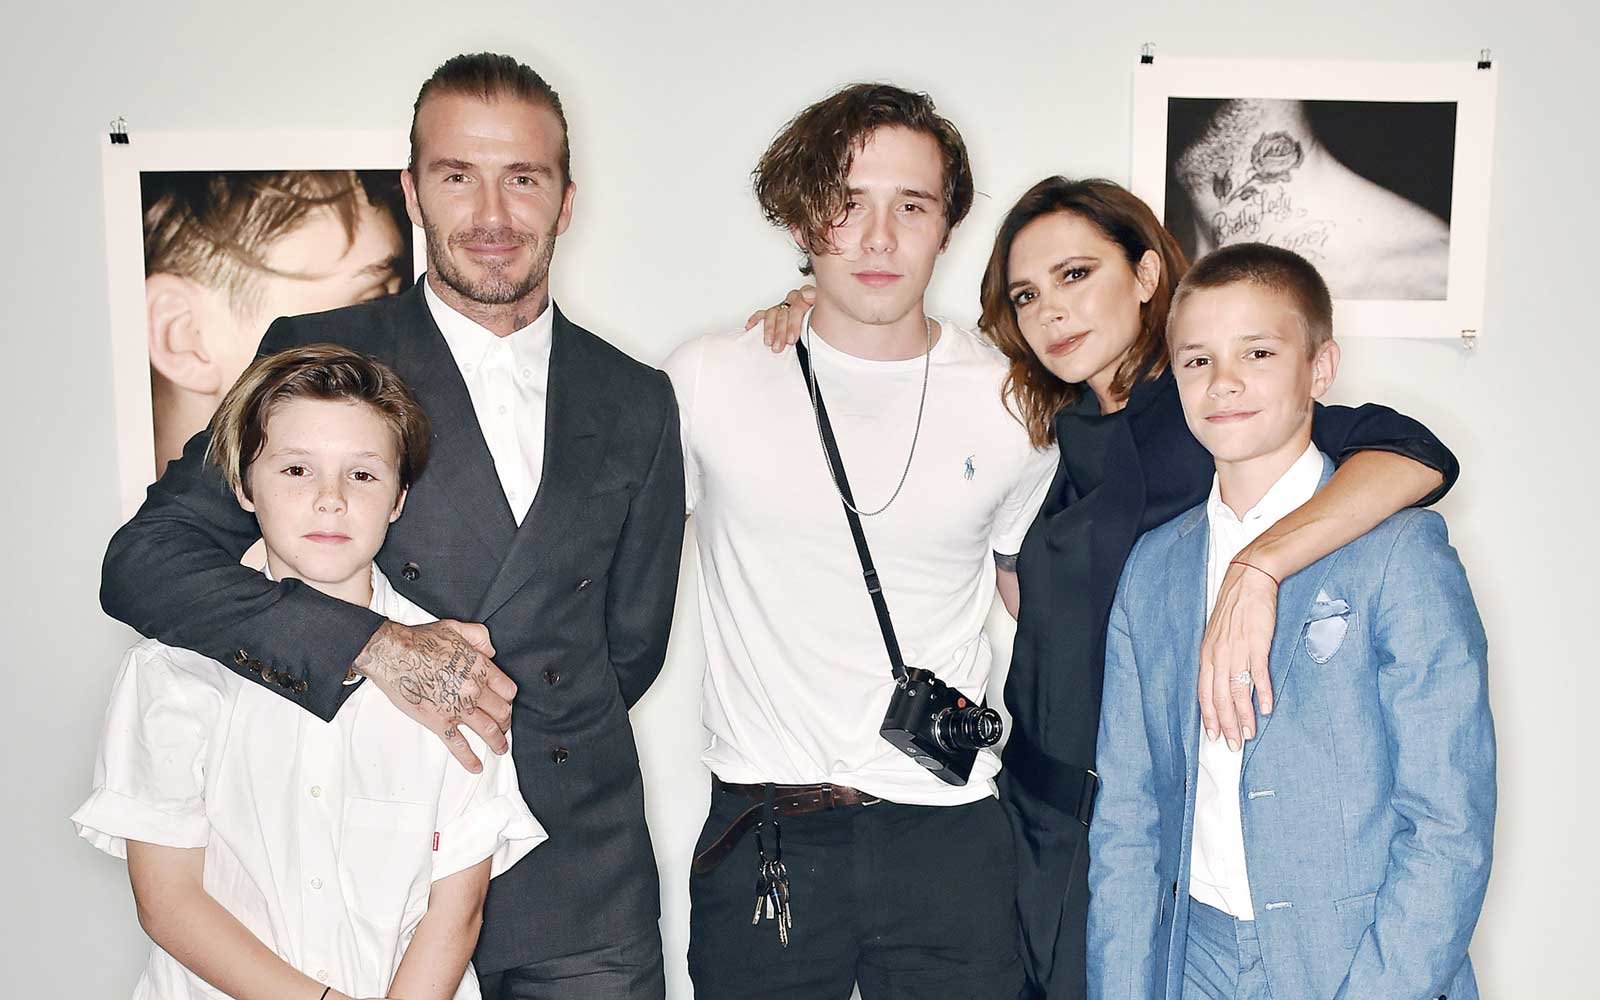 Design Perfect Life to Know Which City You Should Live … Quiz Brooklyn Beckham: 'What I See' exhibition and book launch at Christie's in partnership with Polo Ralph Lauren, New Bond Street, London, UK   27 Jun 2017